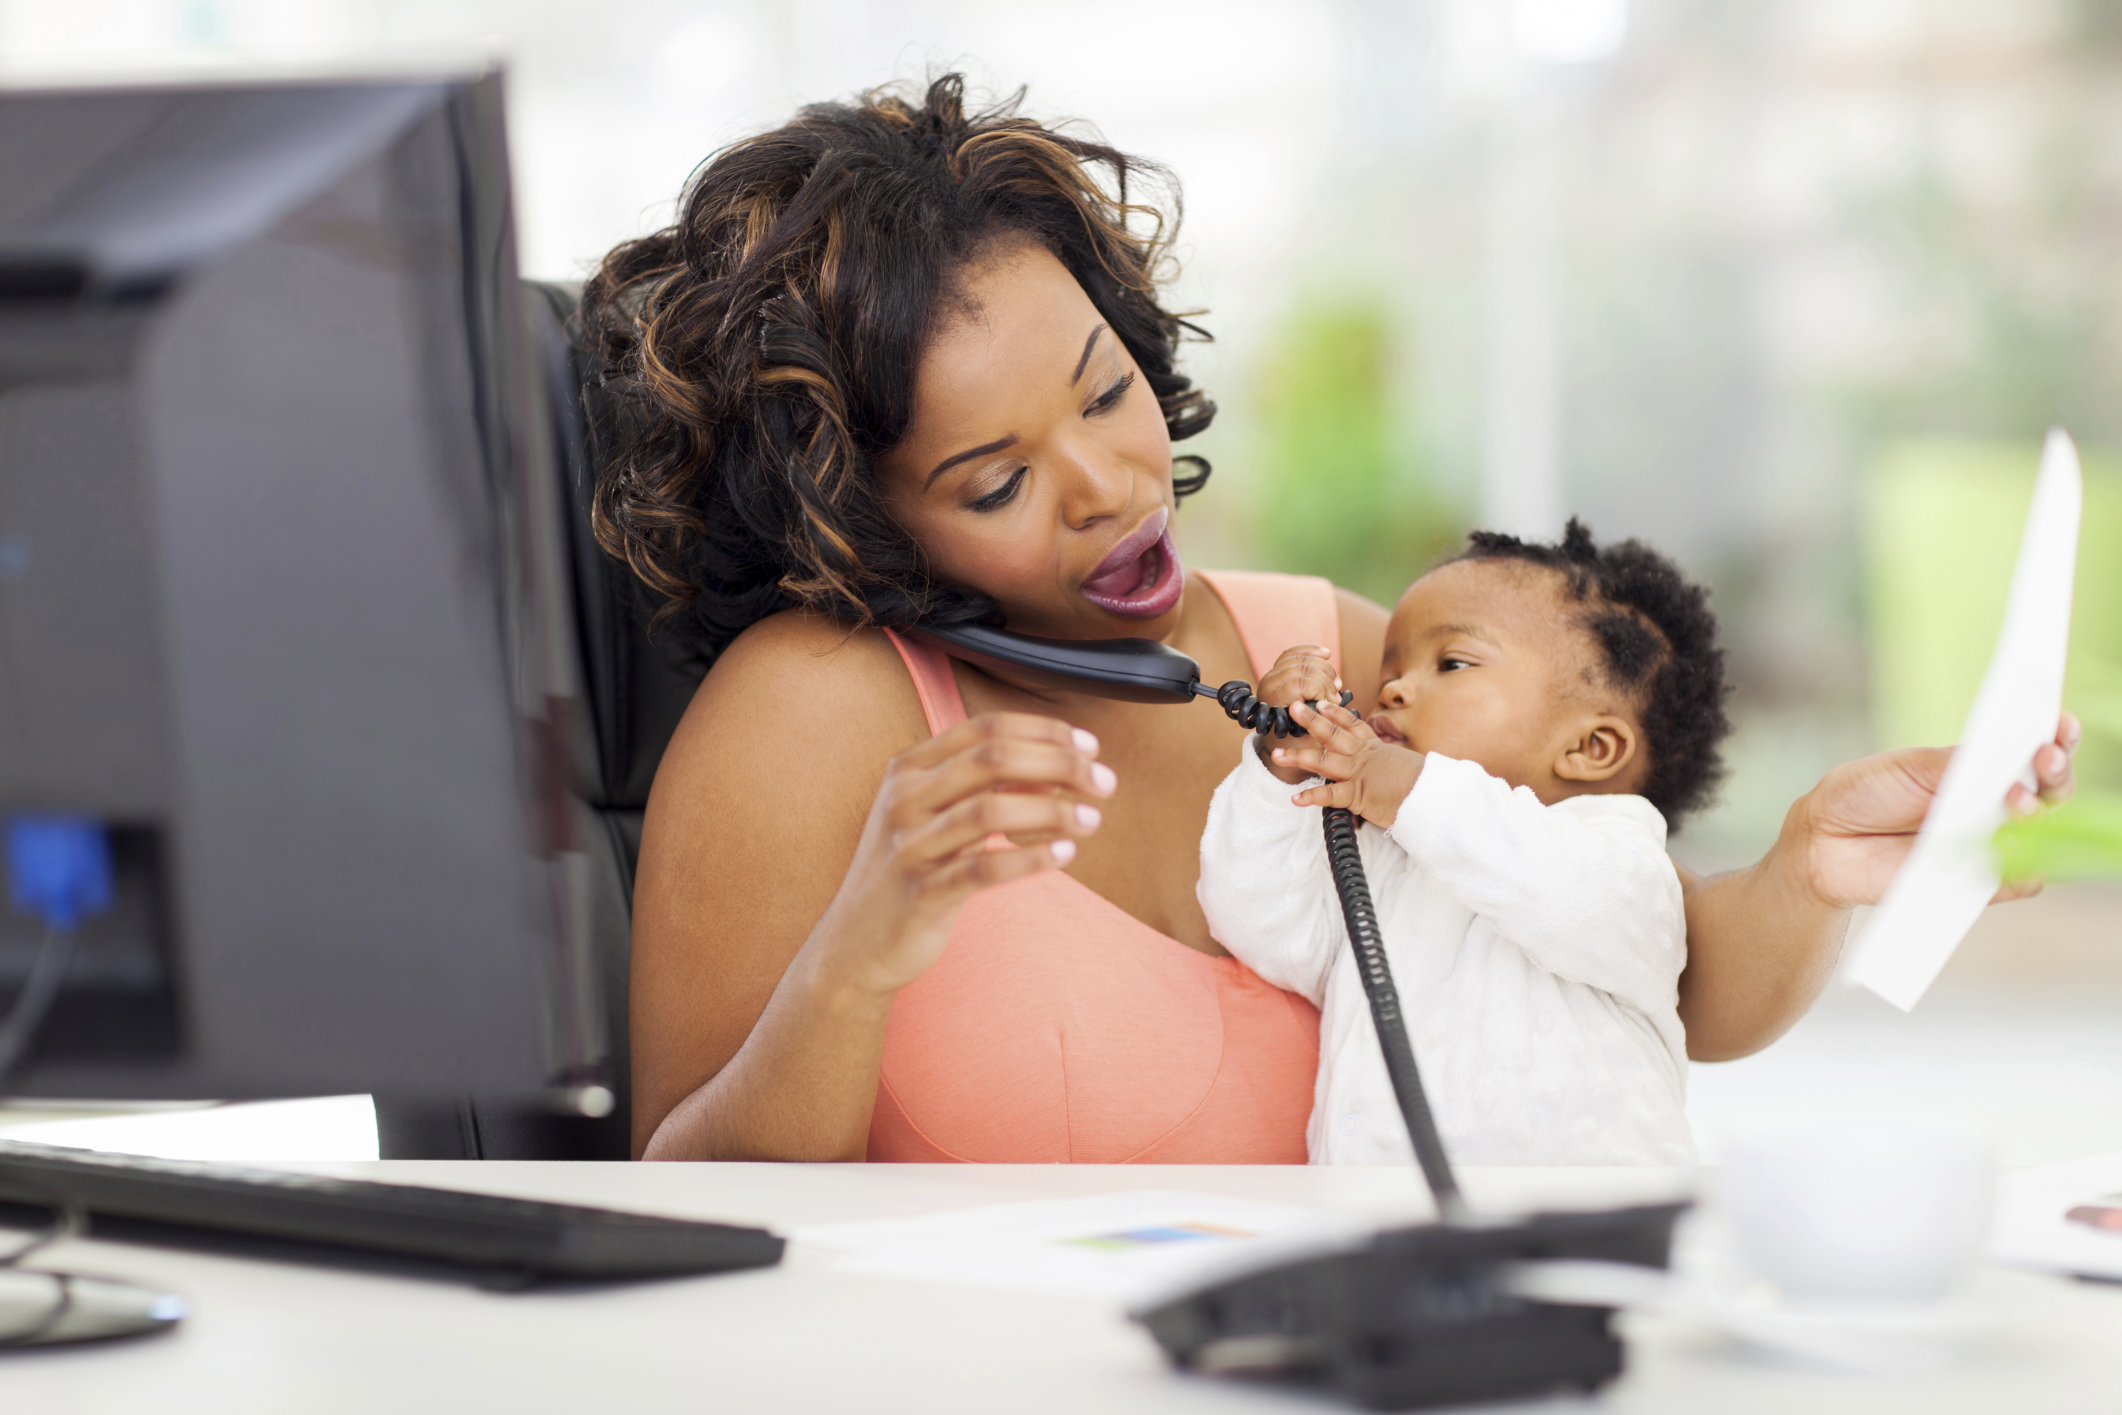 Breastfeeding Tips for Working Moms: Finding the Right Balance